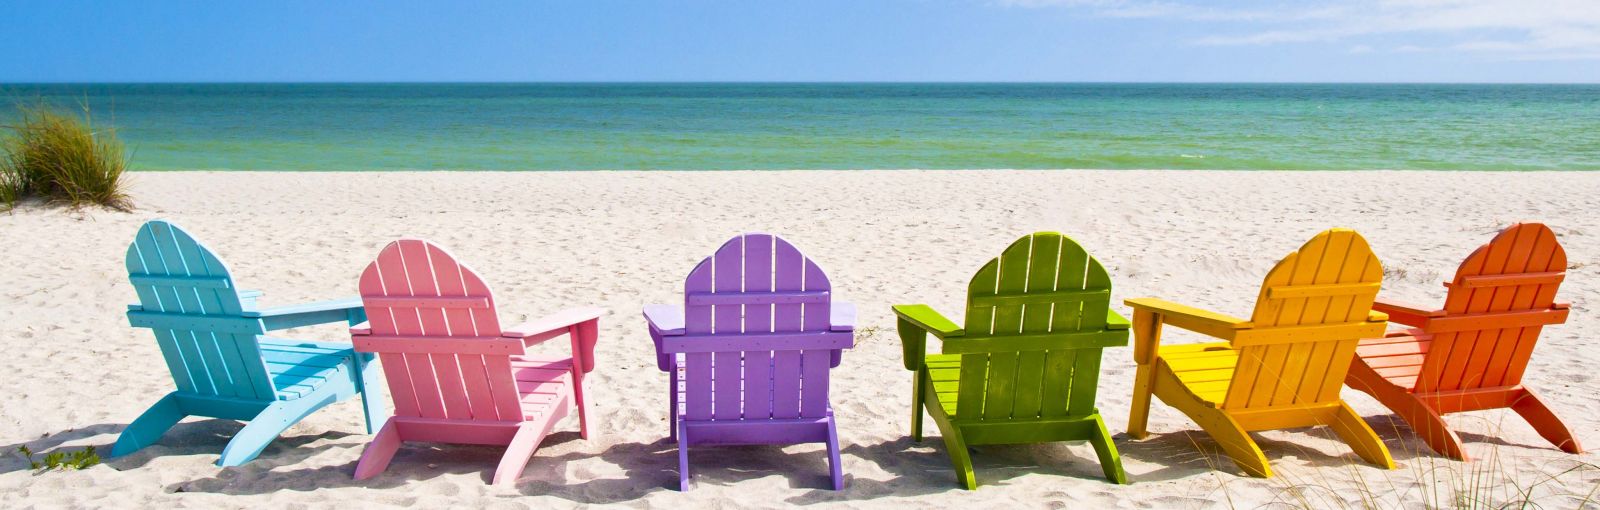 Different colored beach chairs on a beach